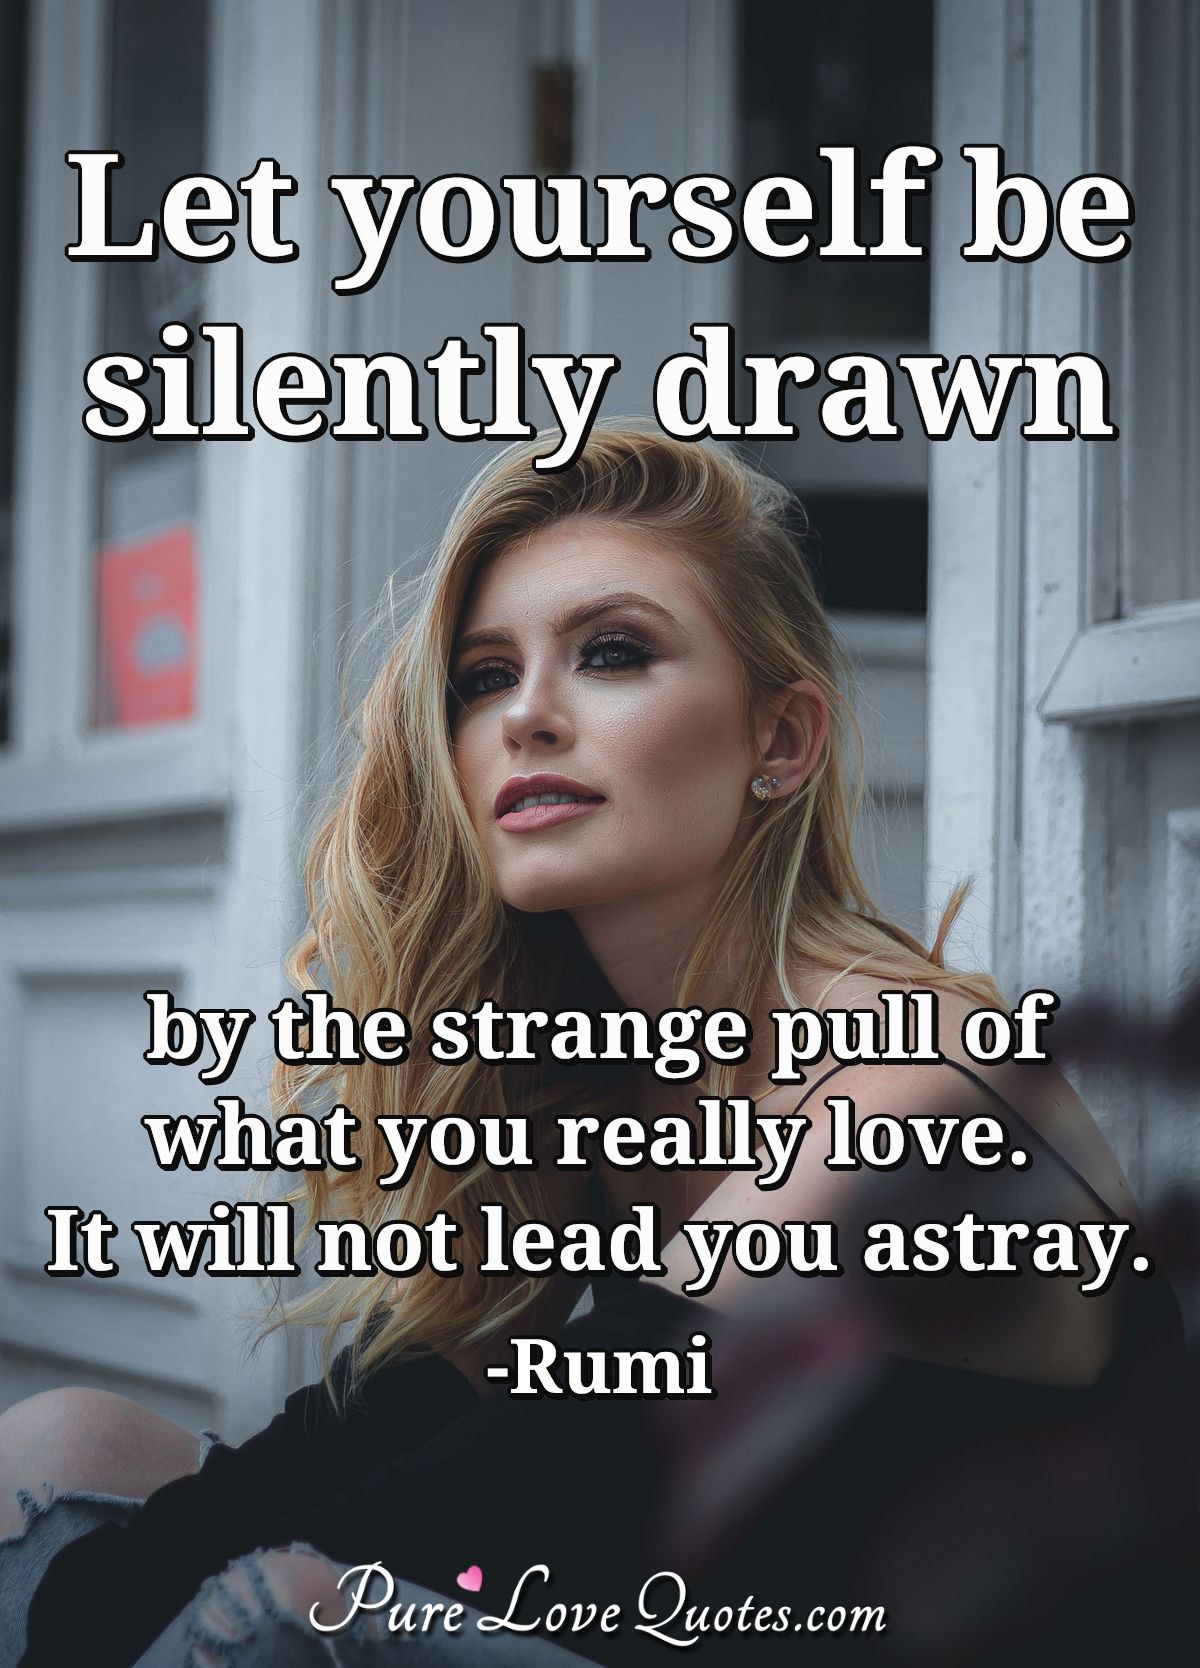 Let yourself be silently drawn by the strange pull of what you really love. It will not lead you astray. - Rumi